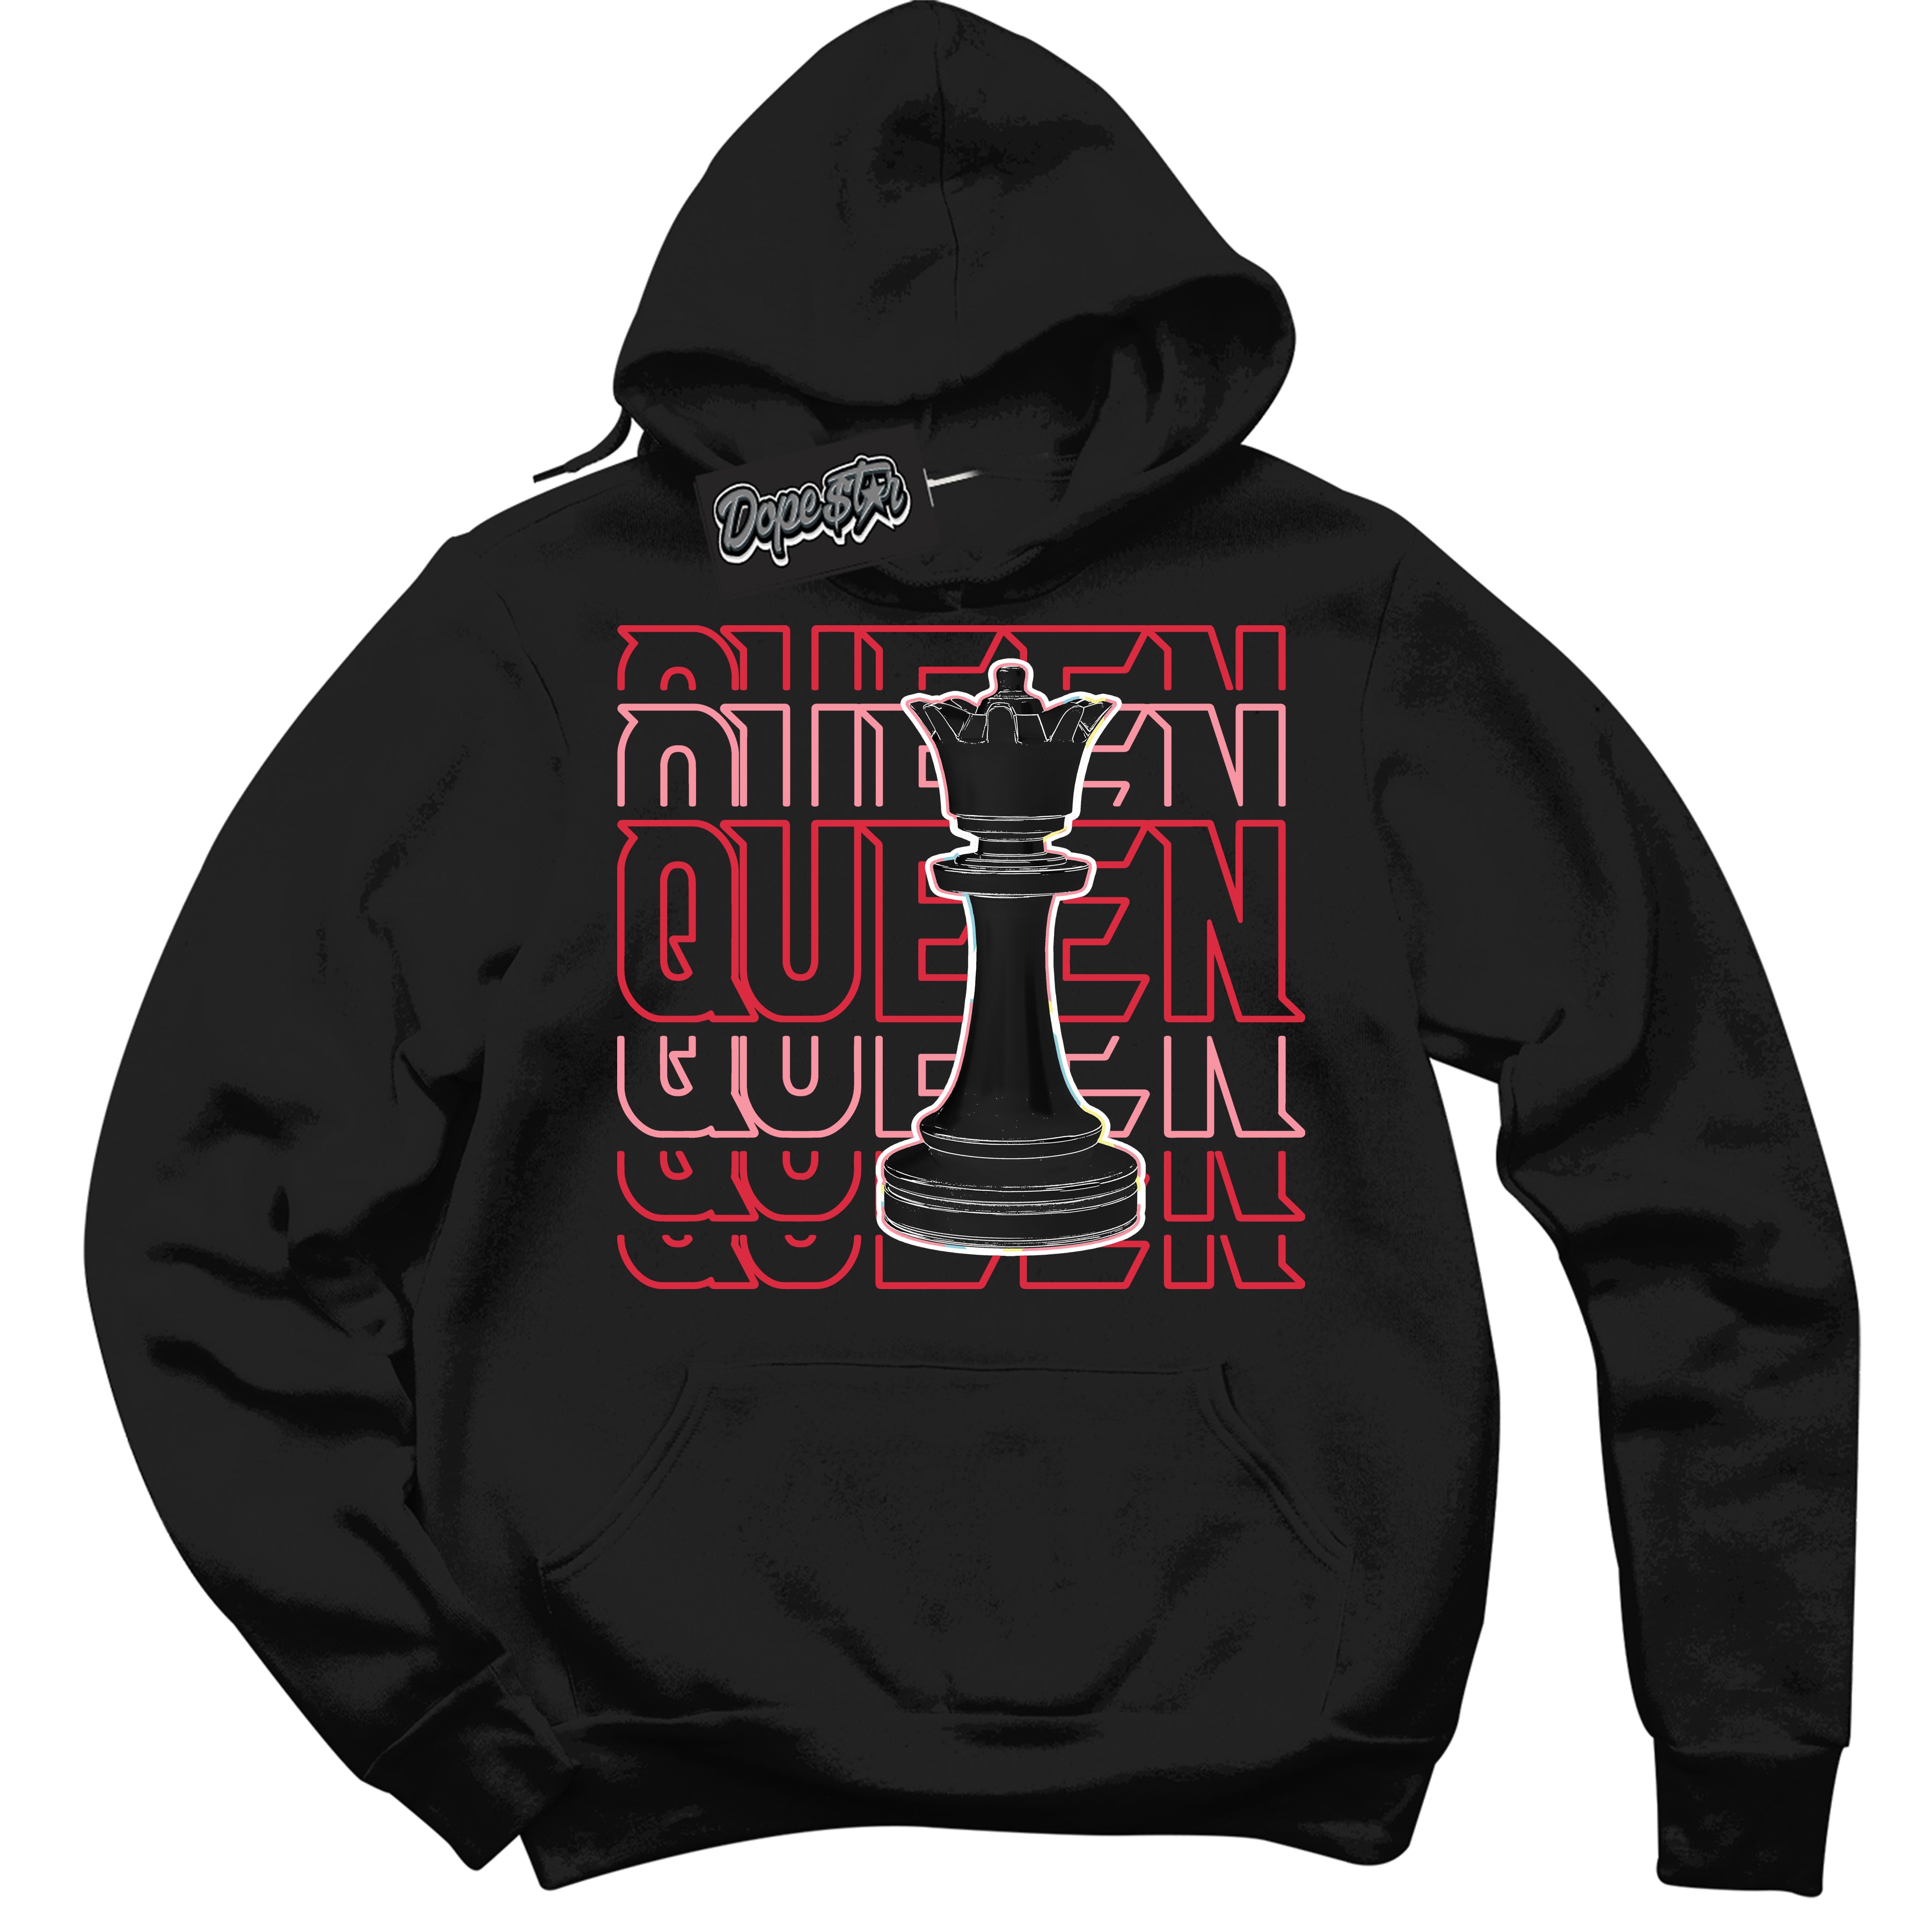 Cool Black Graphic DopeStar Hoodie with “ Queen Chess “ print, that perfectly matches Spider-Verse 1s sneakers